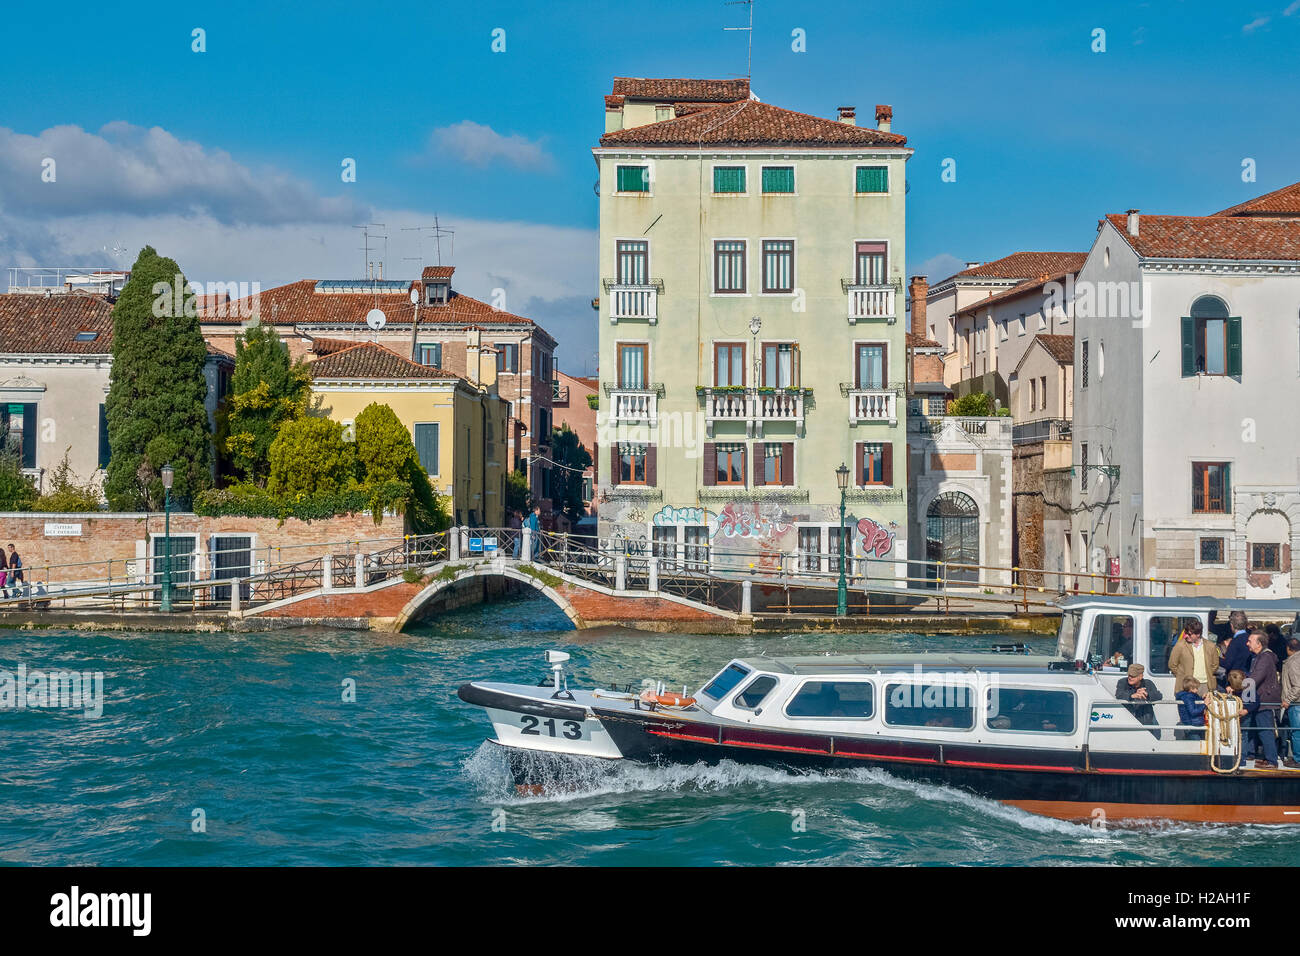 Boat Passing A Bridge Over A Canal Venice Italy Stock Photo